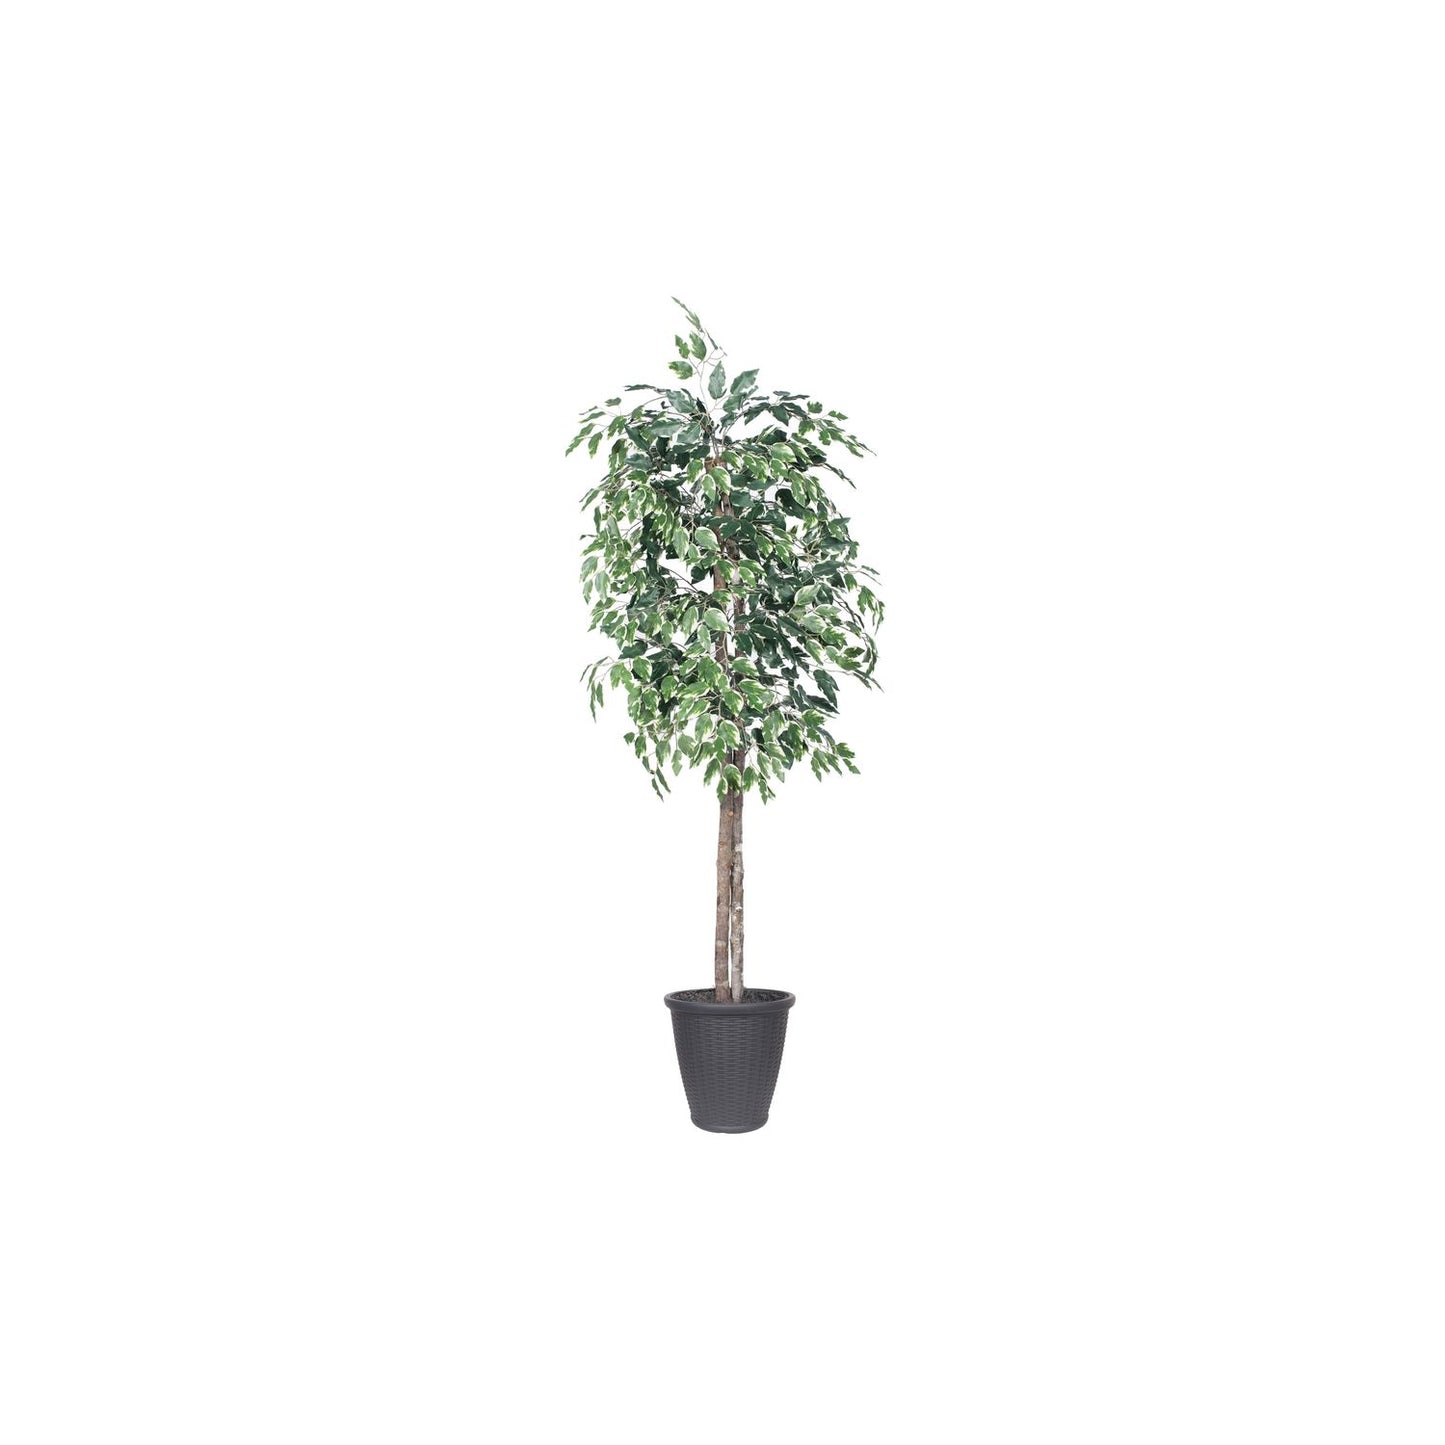 Vickerman 6' Artificial Variegated Ficus Tree, Gray Round Plastic Container